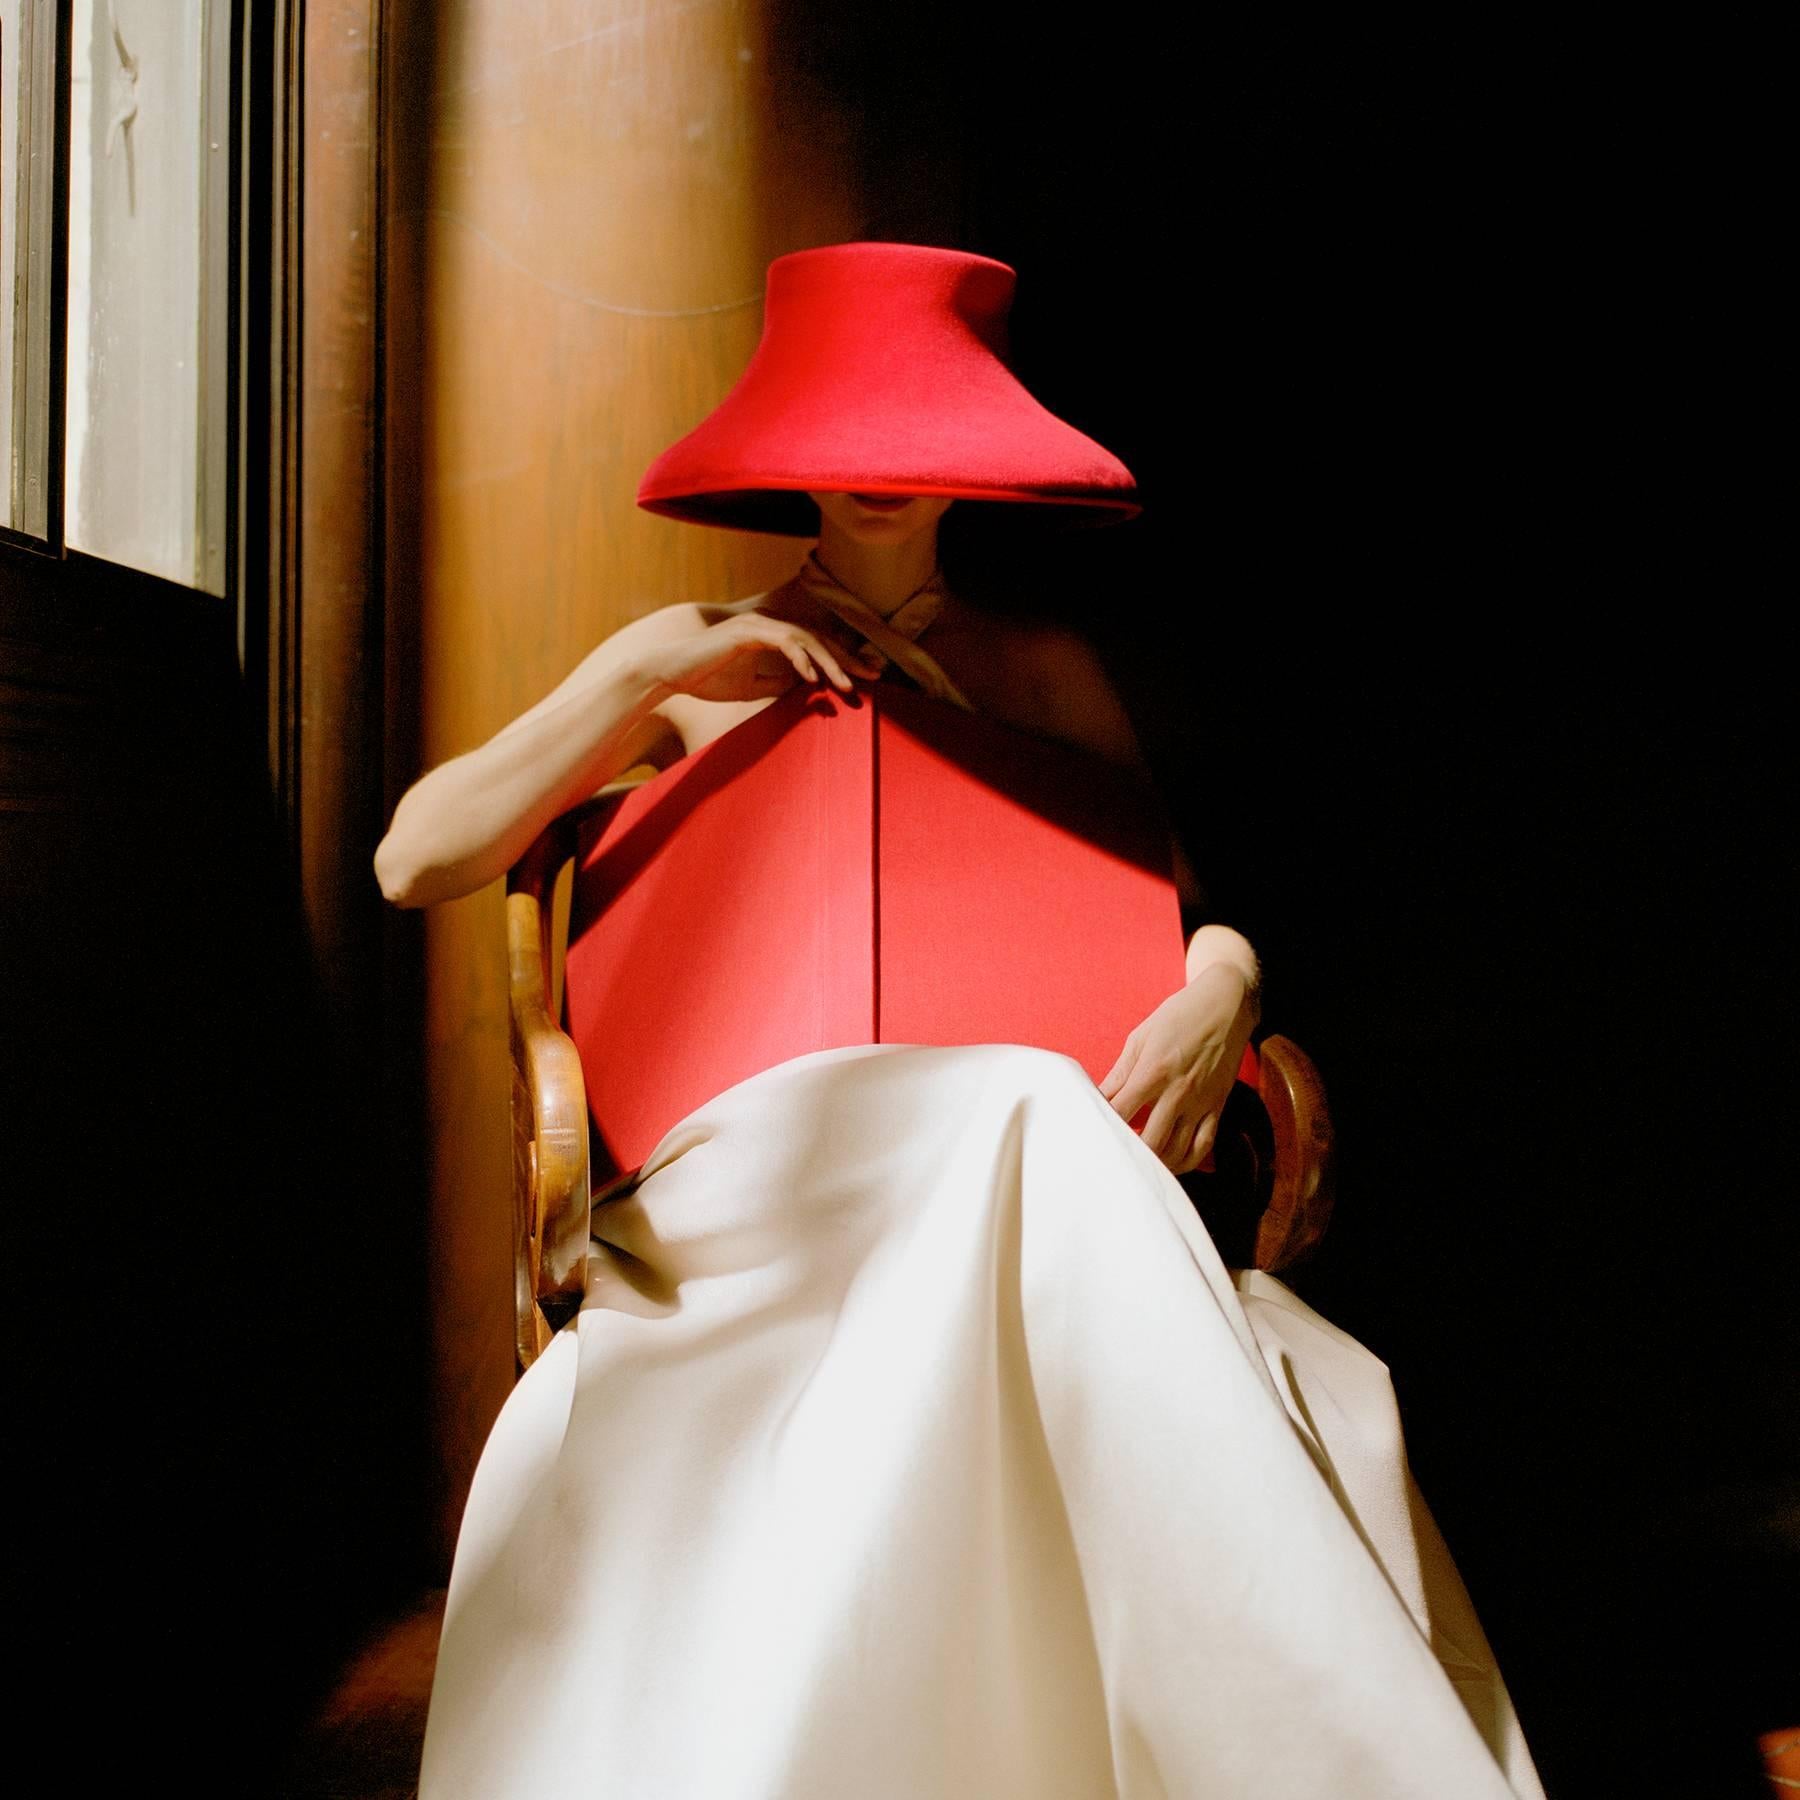 Rodney Smith Figurative Photograph - Bernadette in Red Hat with Book, color fashion photography- 3 Sizes Available